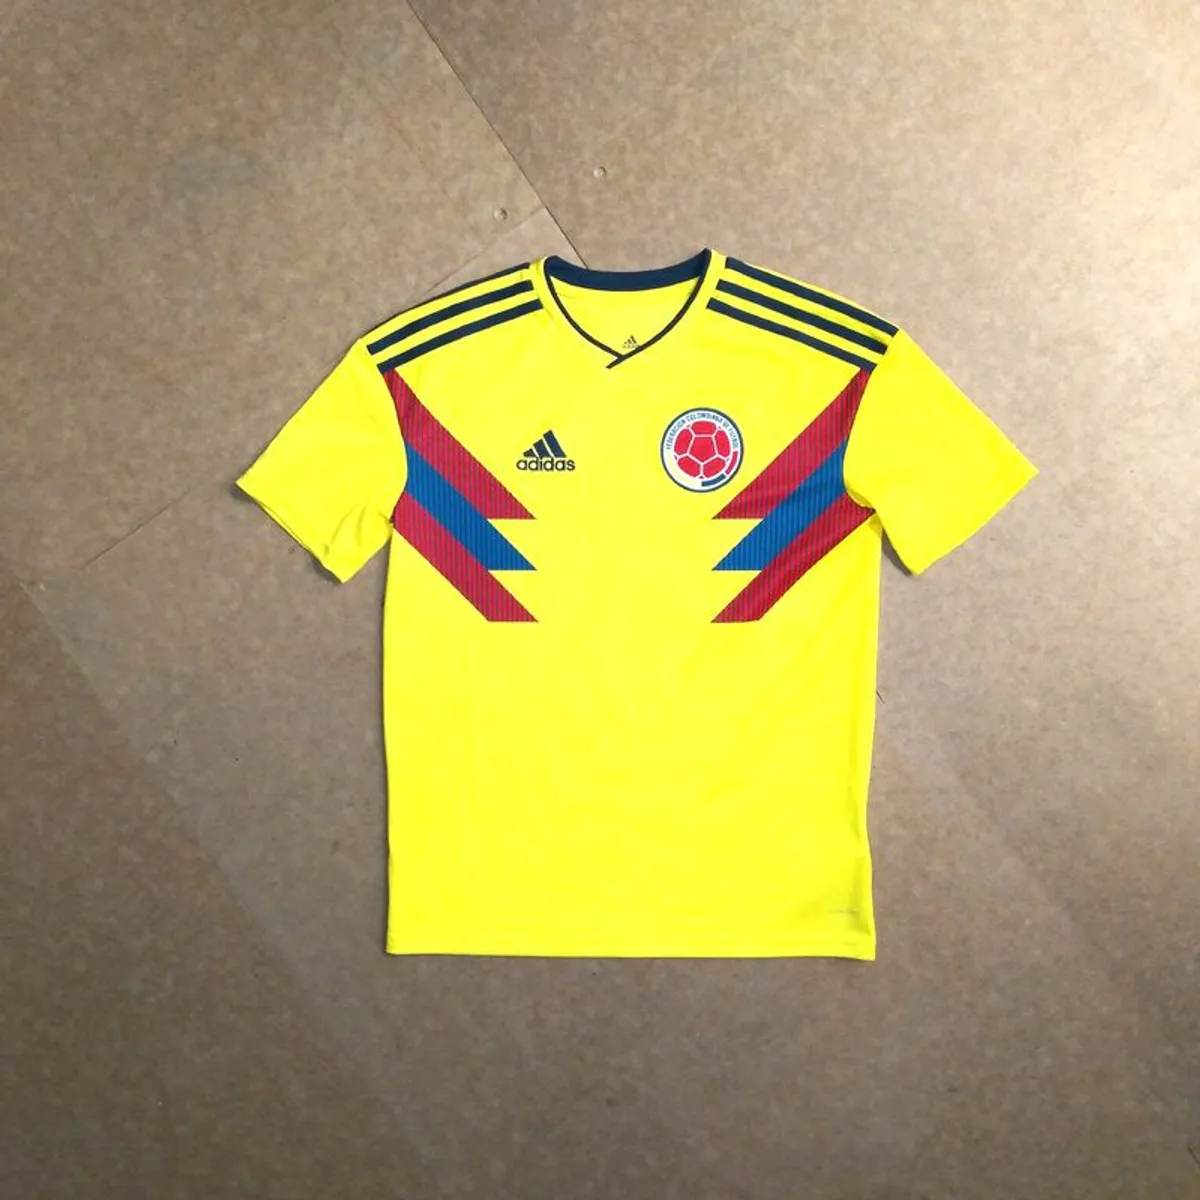 FREE POST Colombia Jersey adidas Shirt World Cup Football Soccer Yellow Boys Girls Youths Childs Childrens